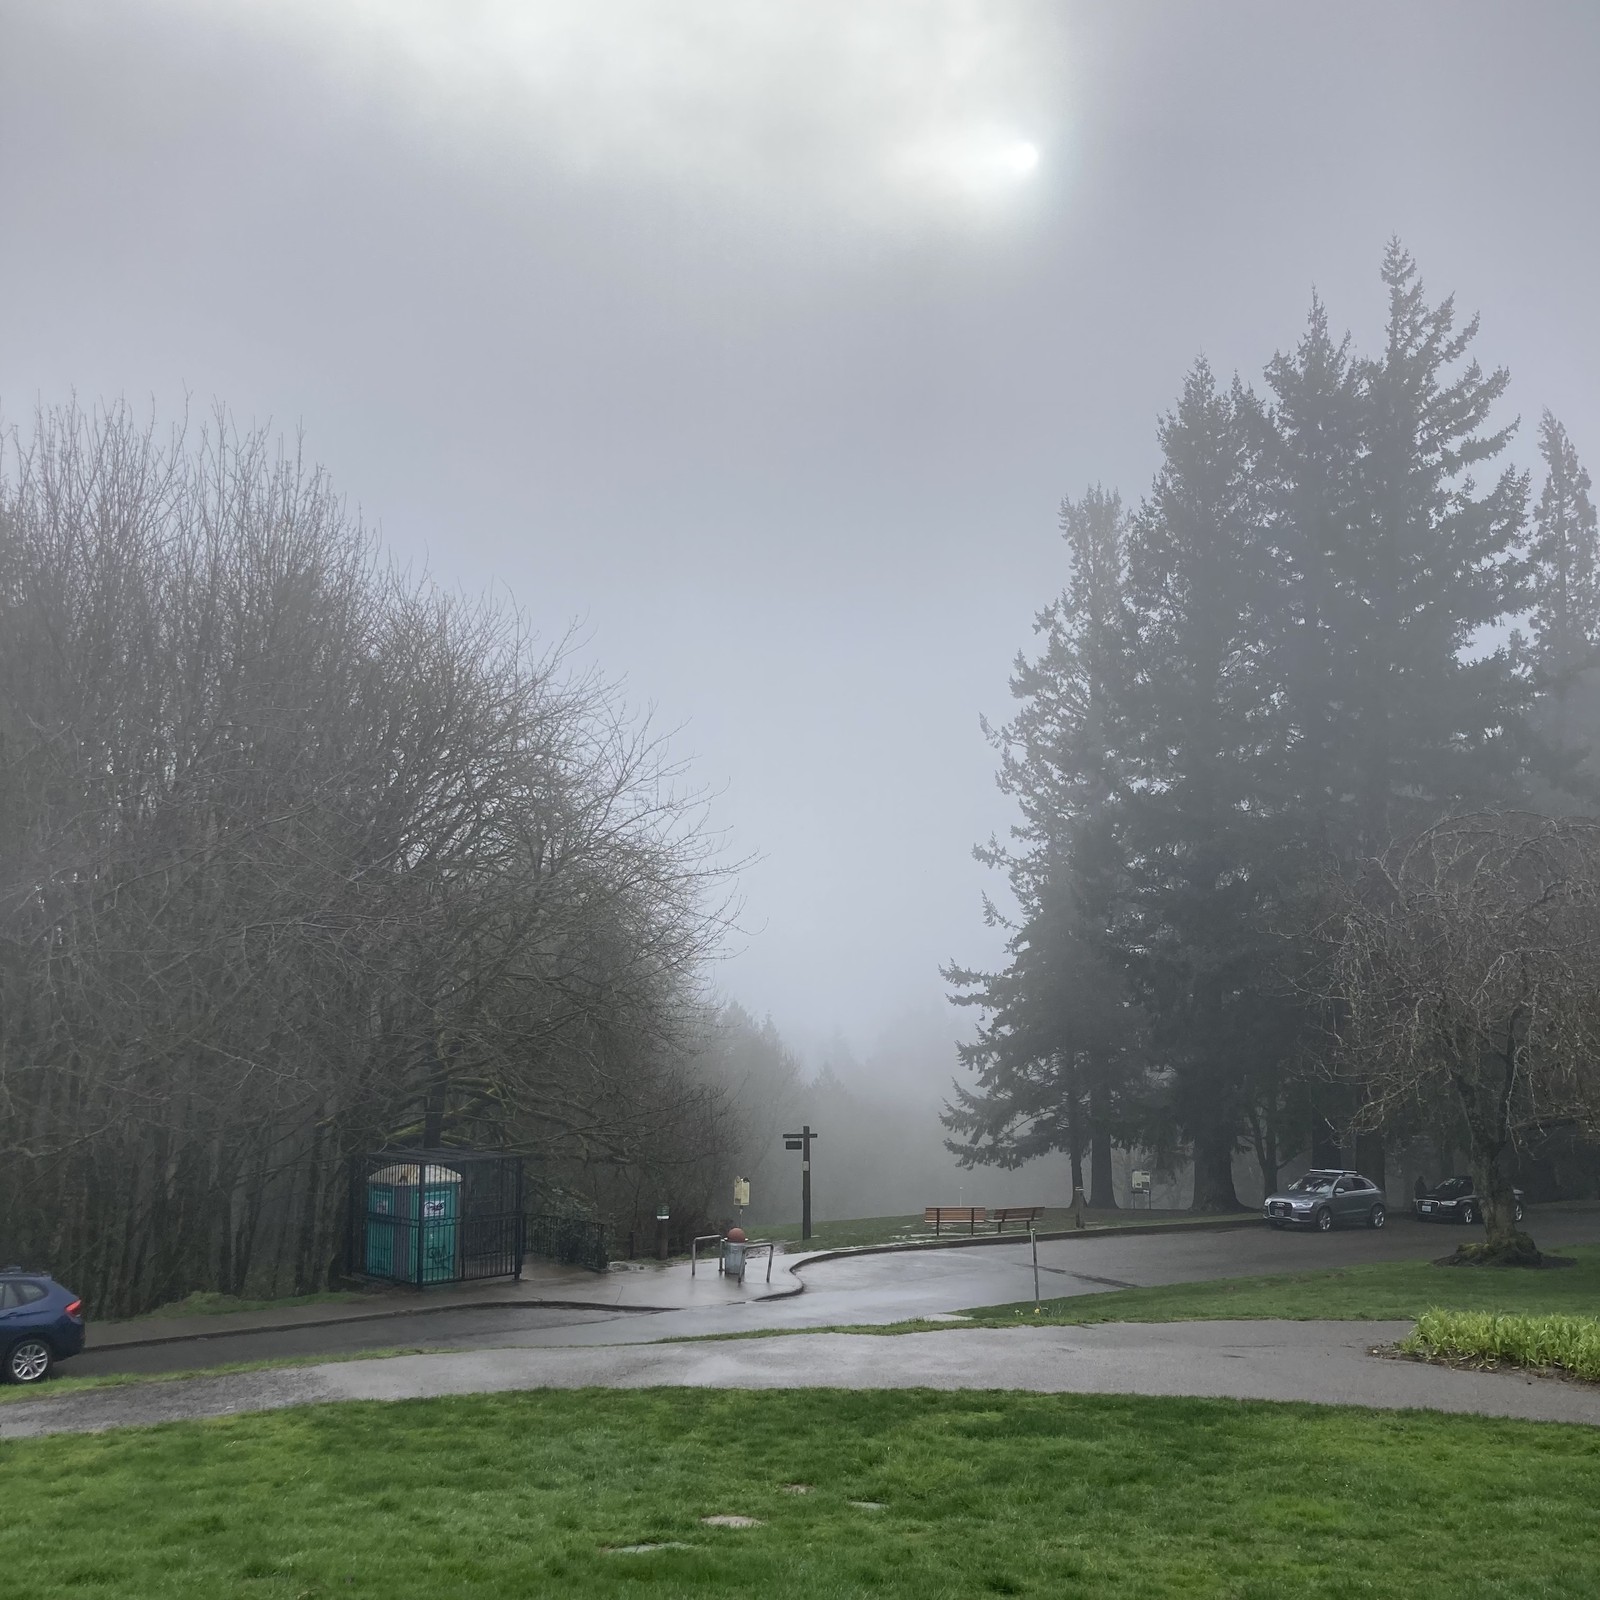 View from Council Crest Park toward Mt. Hood, which is hidden behind many layers of mist and cloud. The sun shines weakly through a thin patch in the moisture